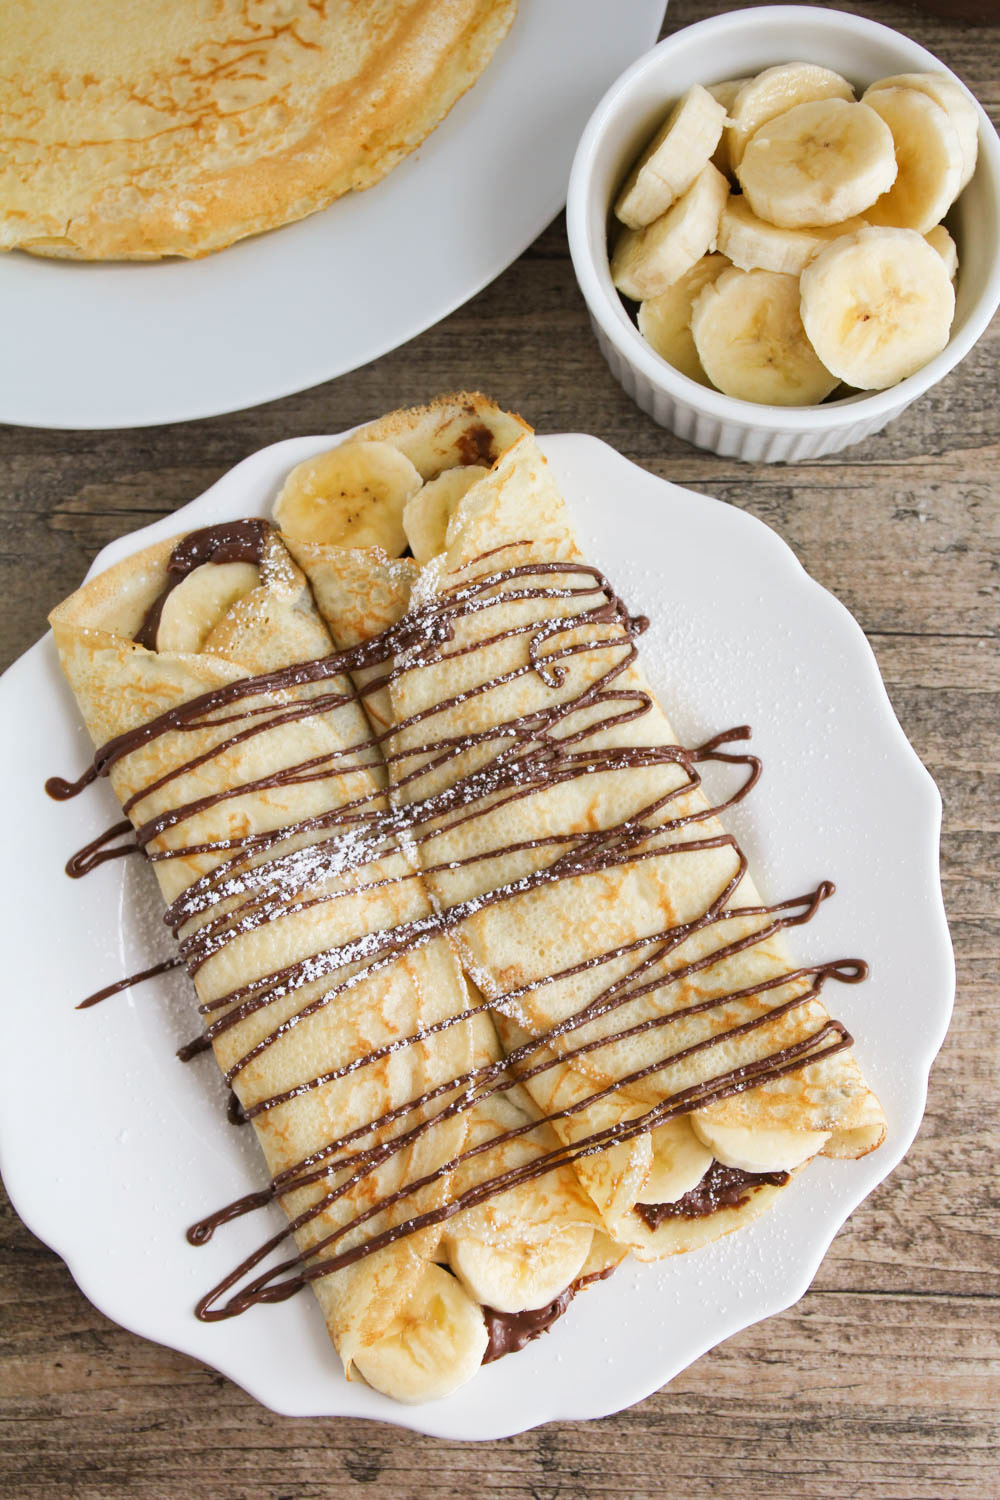 Nutella Banana Crepes from The Baker Upstairs